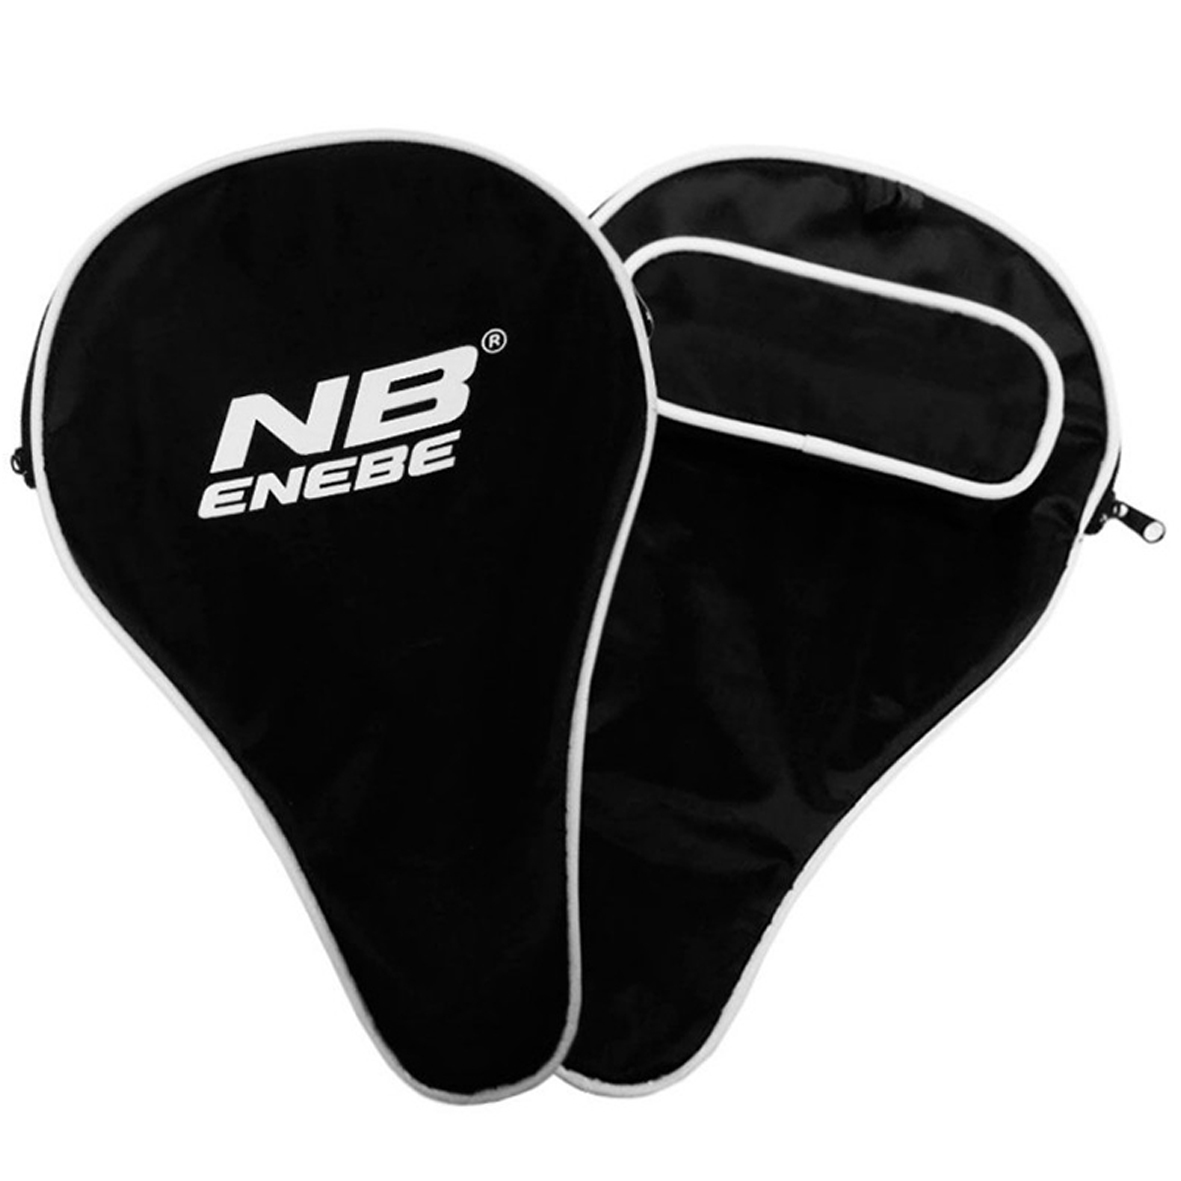 NB PADDLE COVER WITH BALL CAGE.